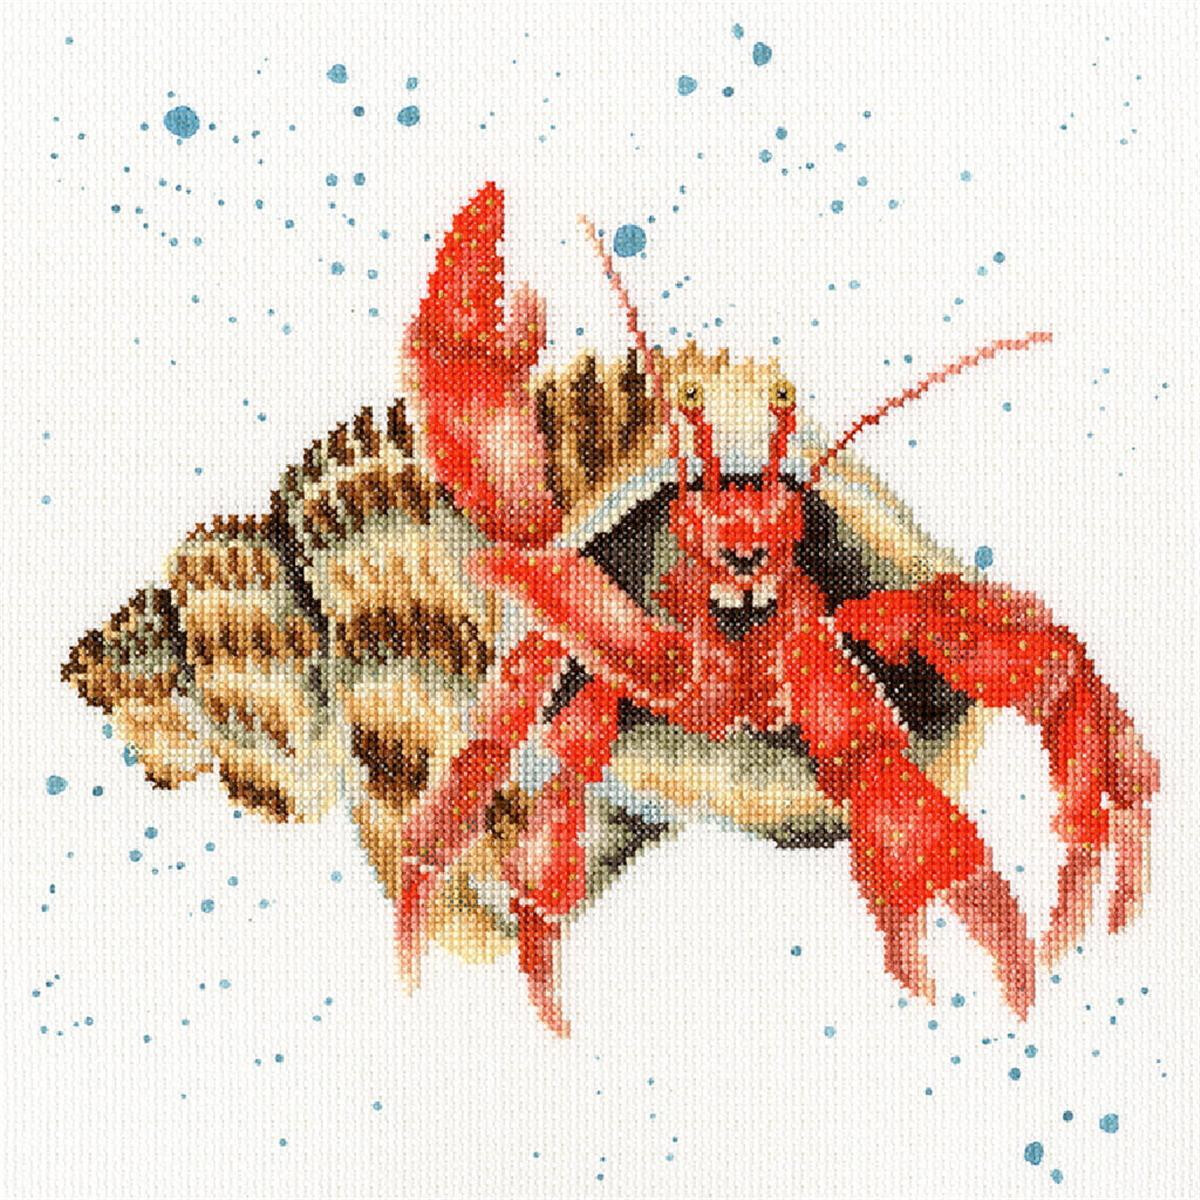 A detailed cross stitch of a bright red hermit crab...